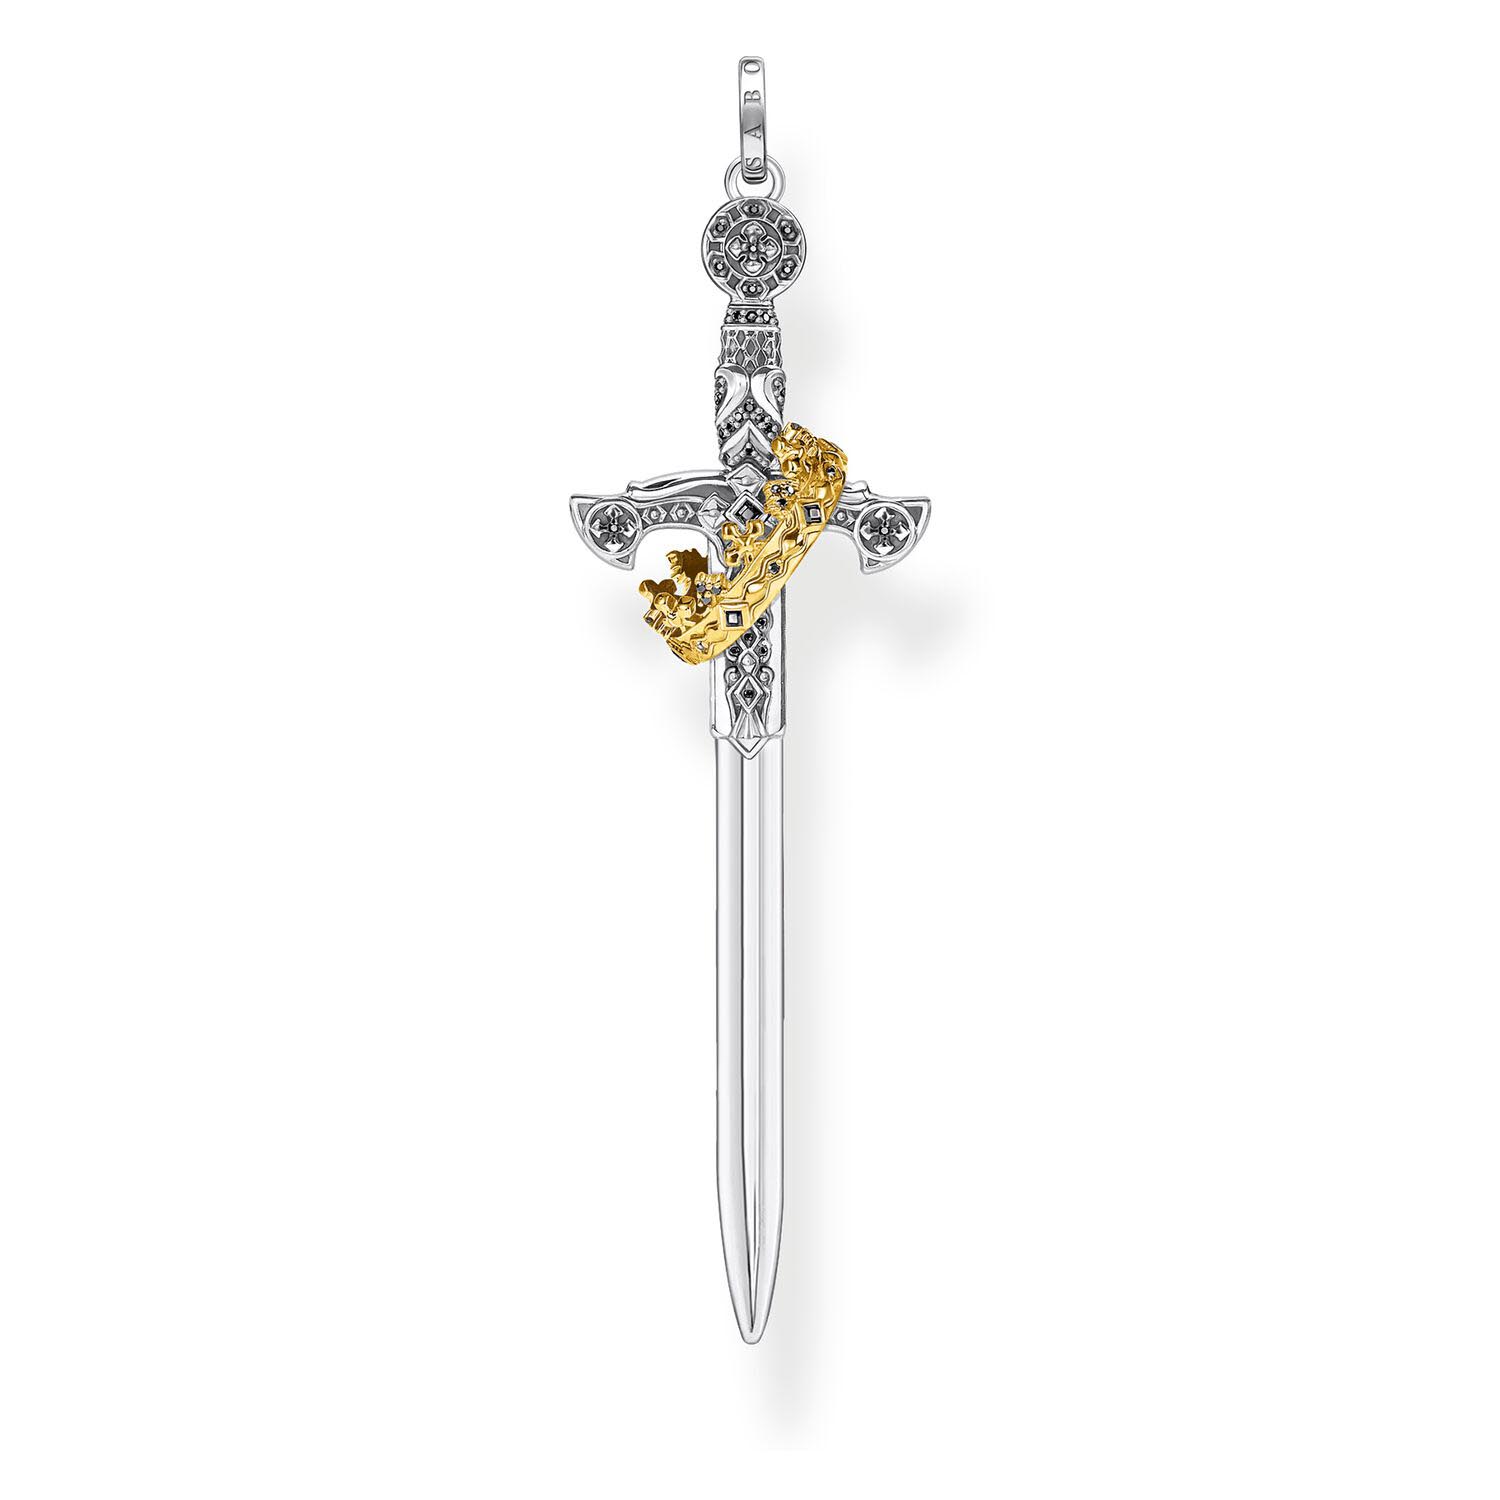 Thomas Sabo Kingdom Gold Plated Sterling Silver Crown Sword Pendant